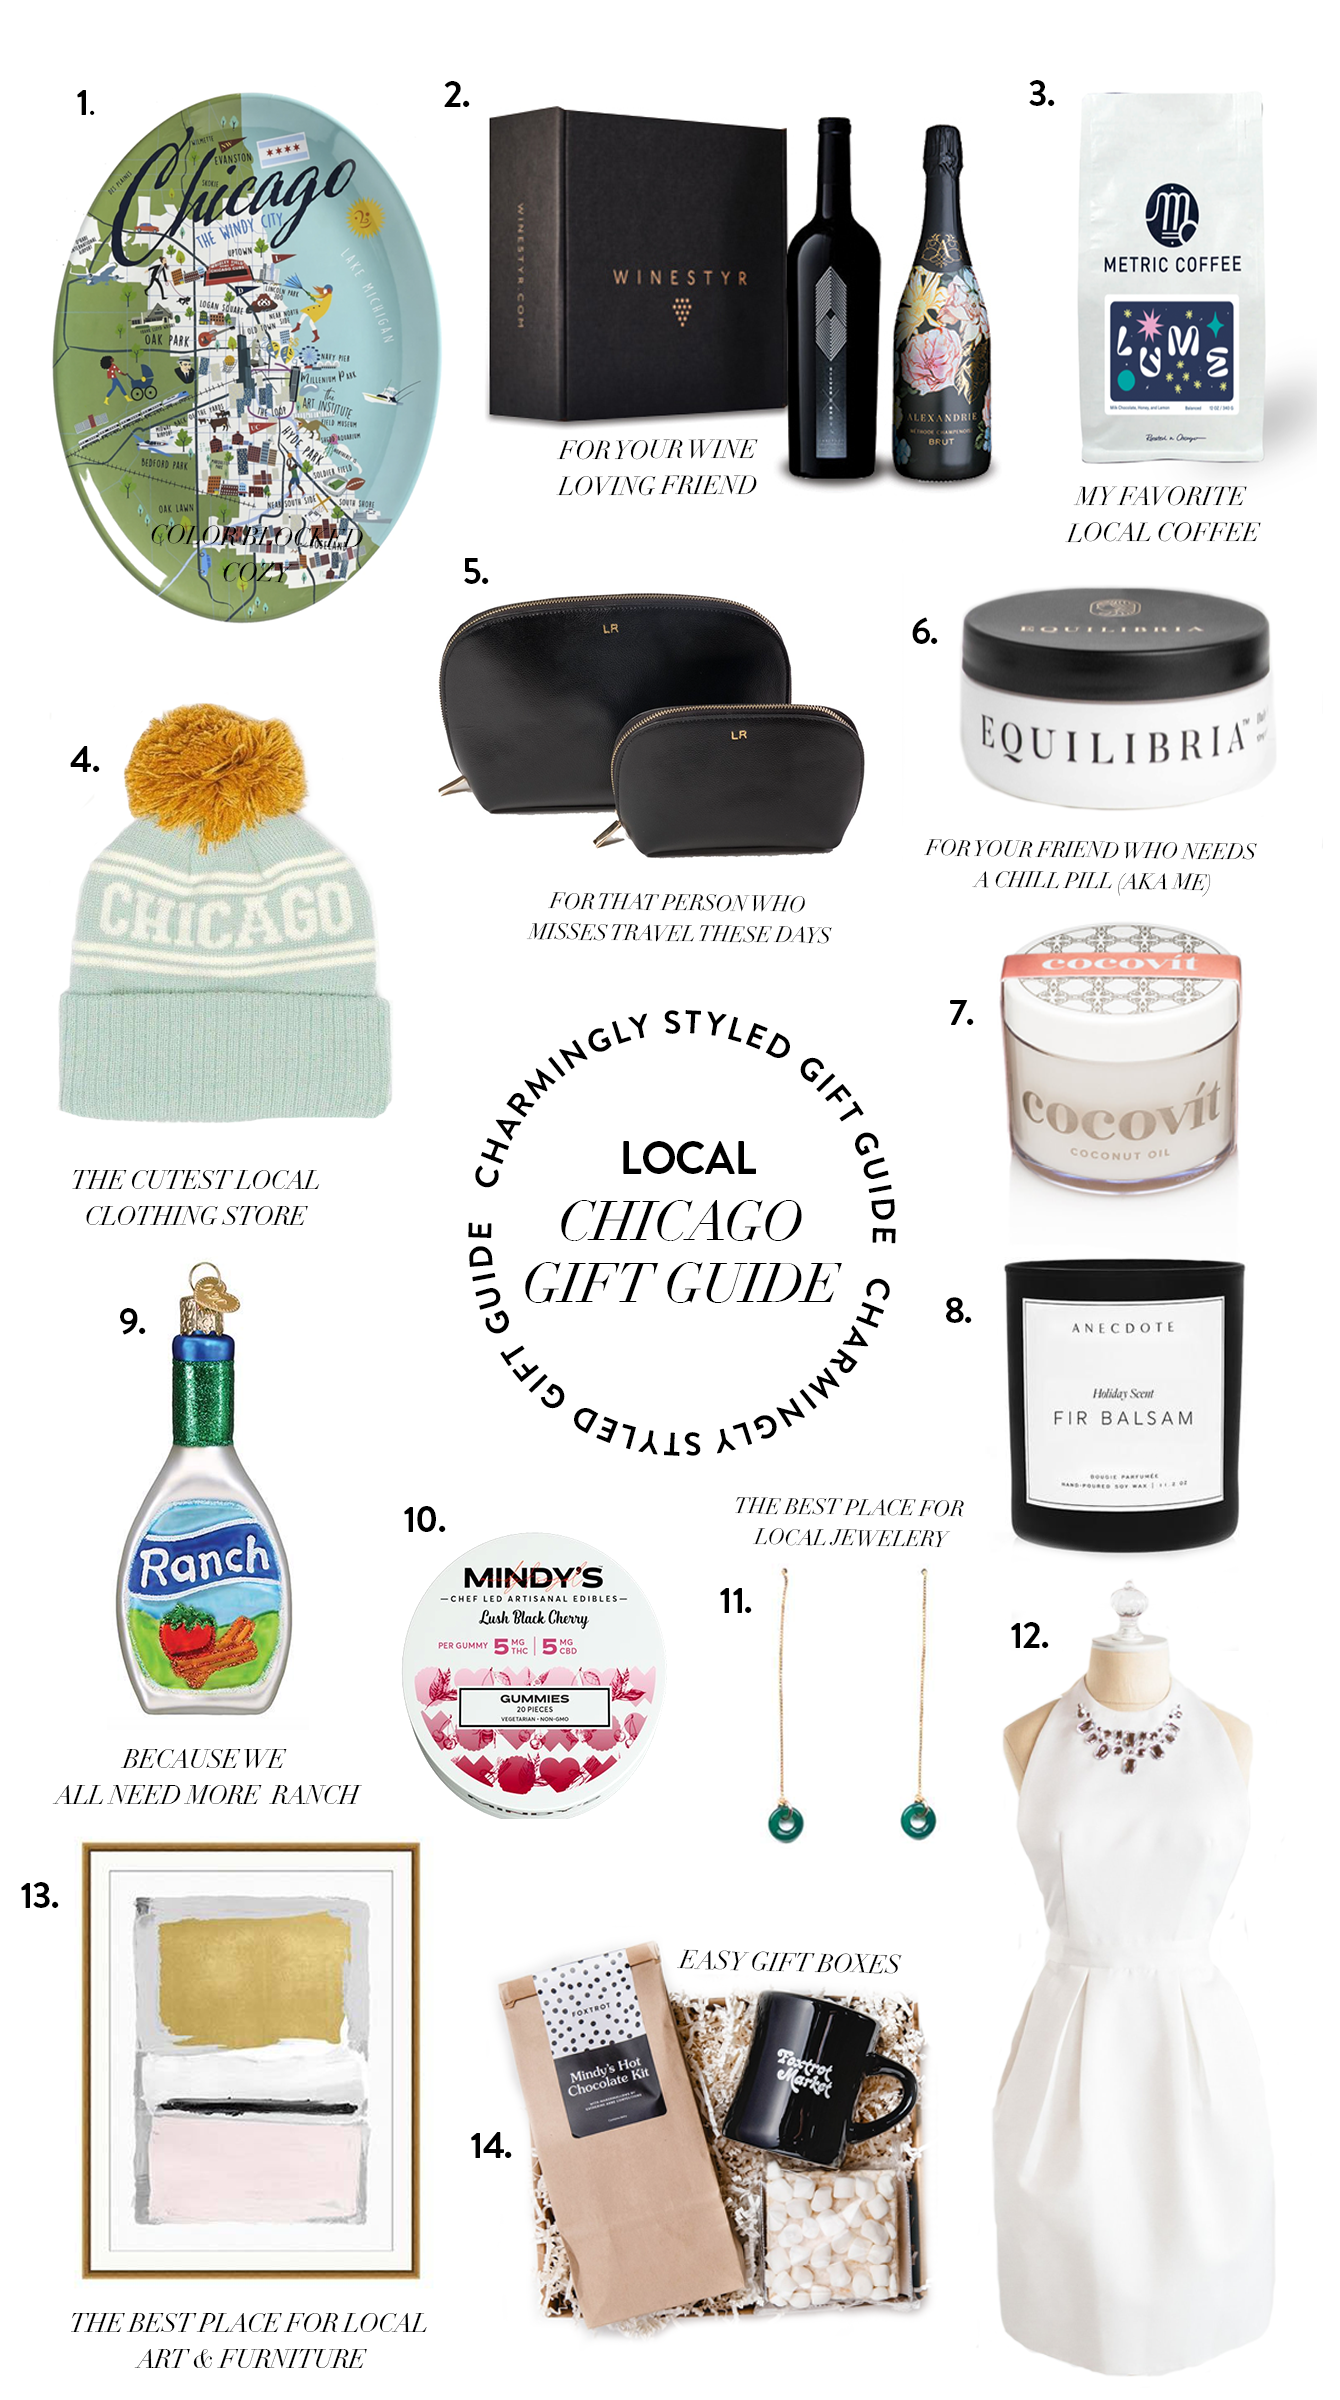 https://charminglystyled.com/wp-content/uploads/2020/12/Chicago-Local-Holiday-Gift-Guide.png